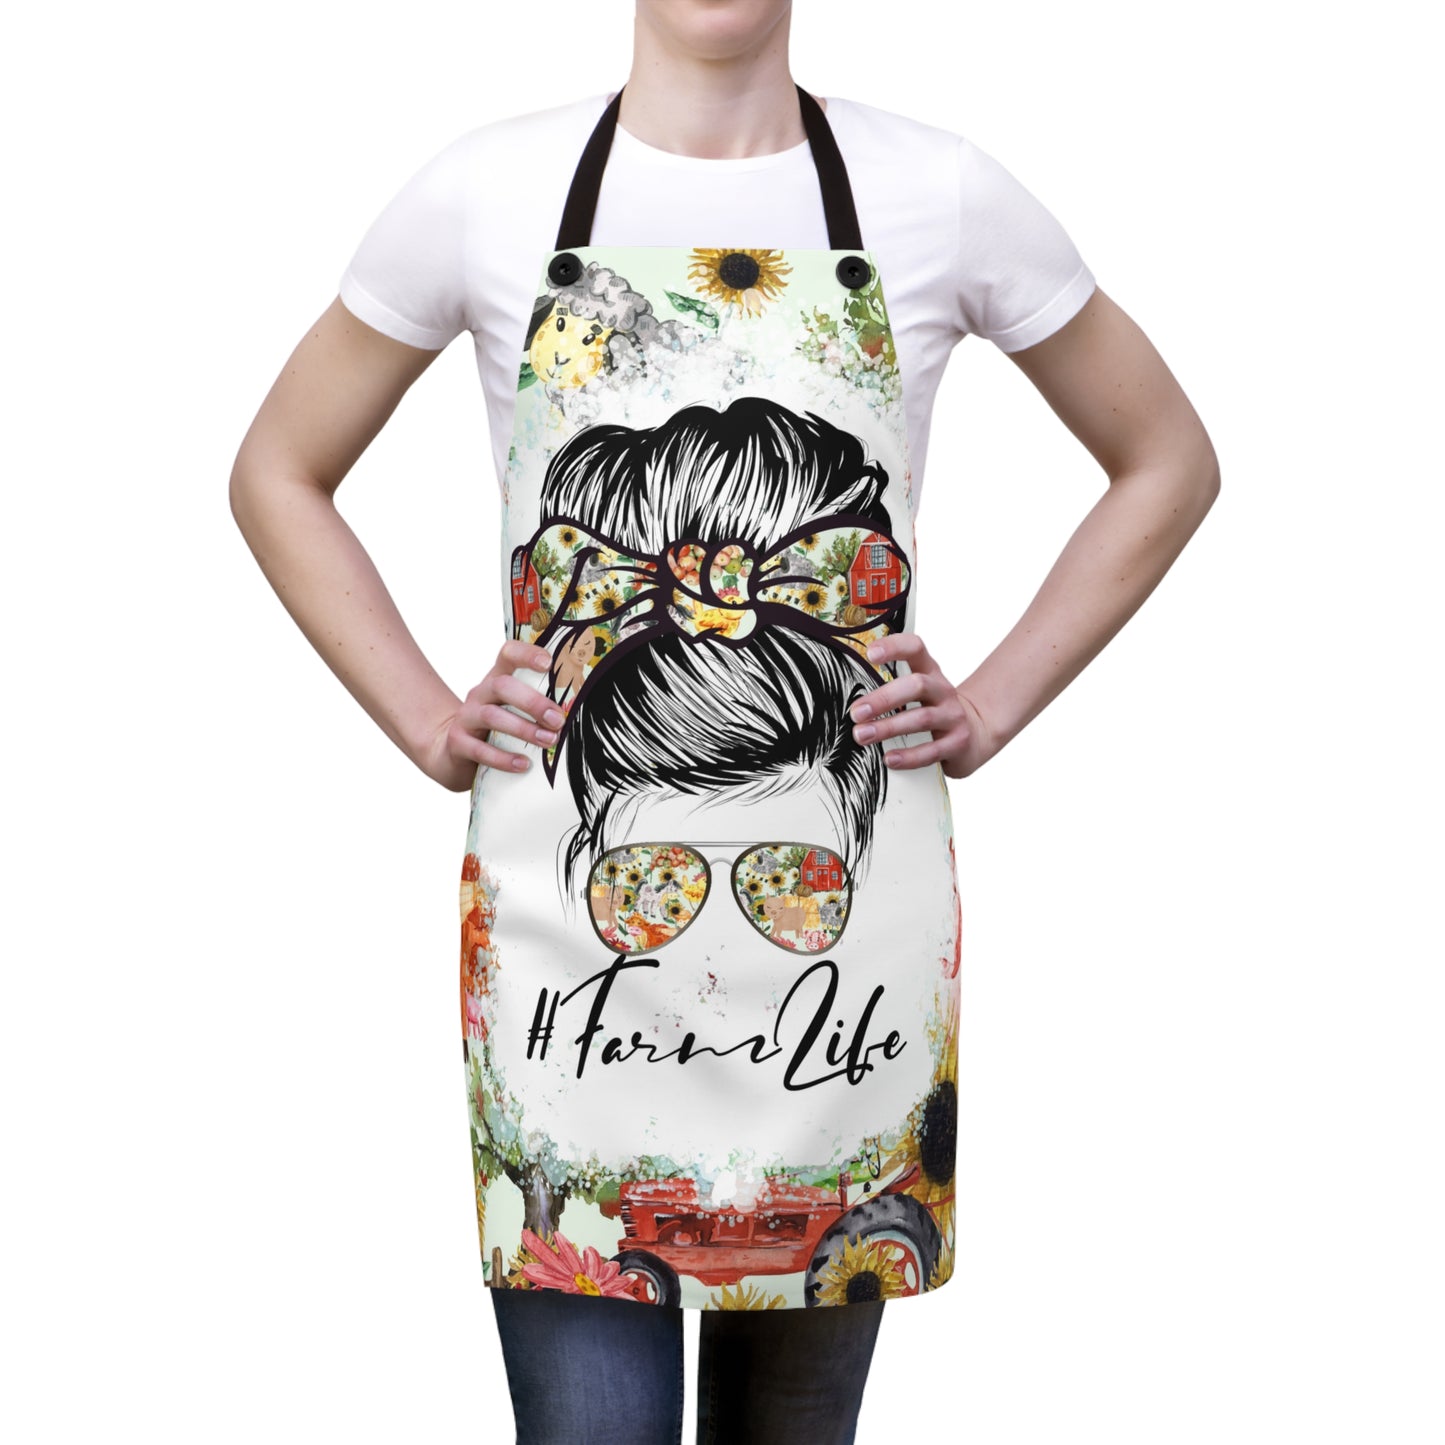 #FarmerLife Apron front on person